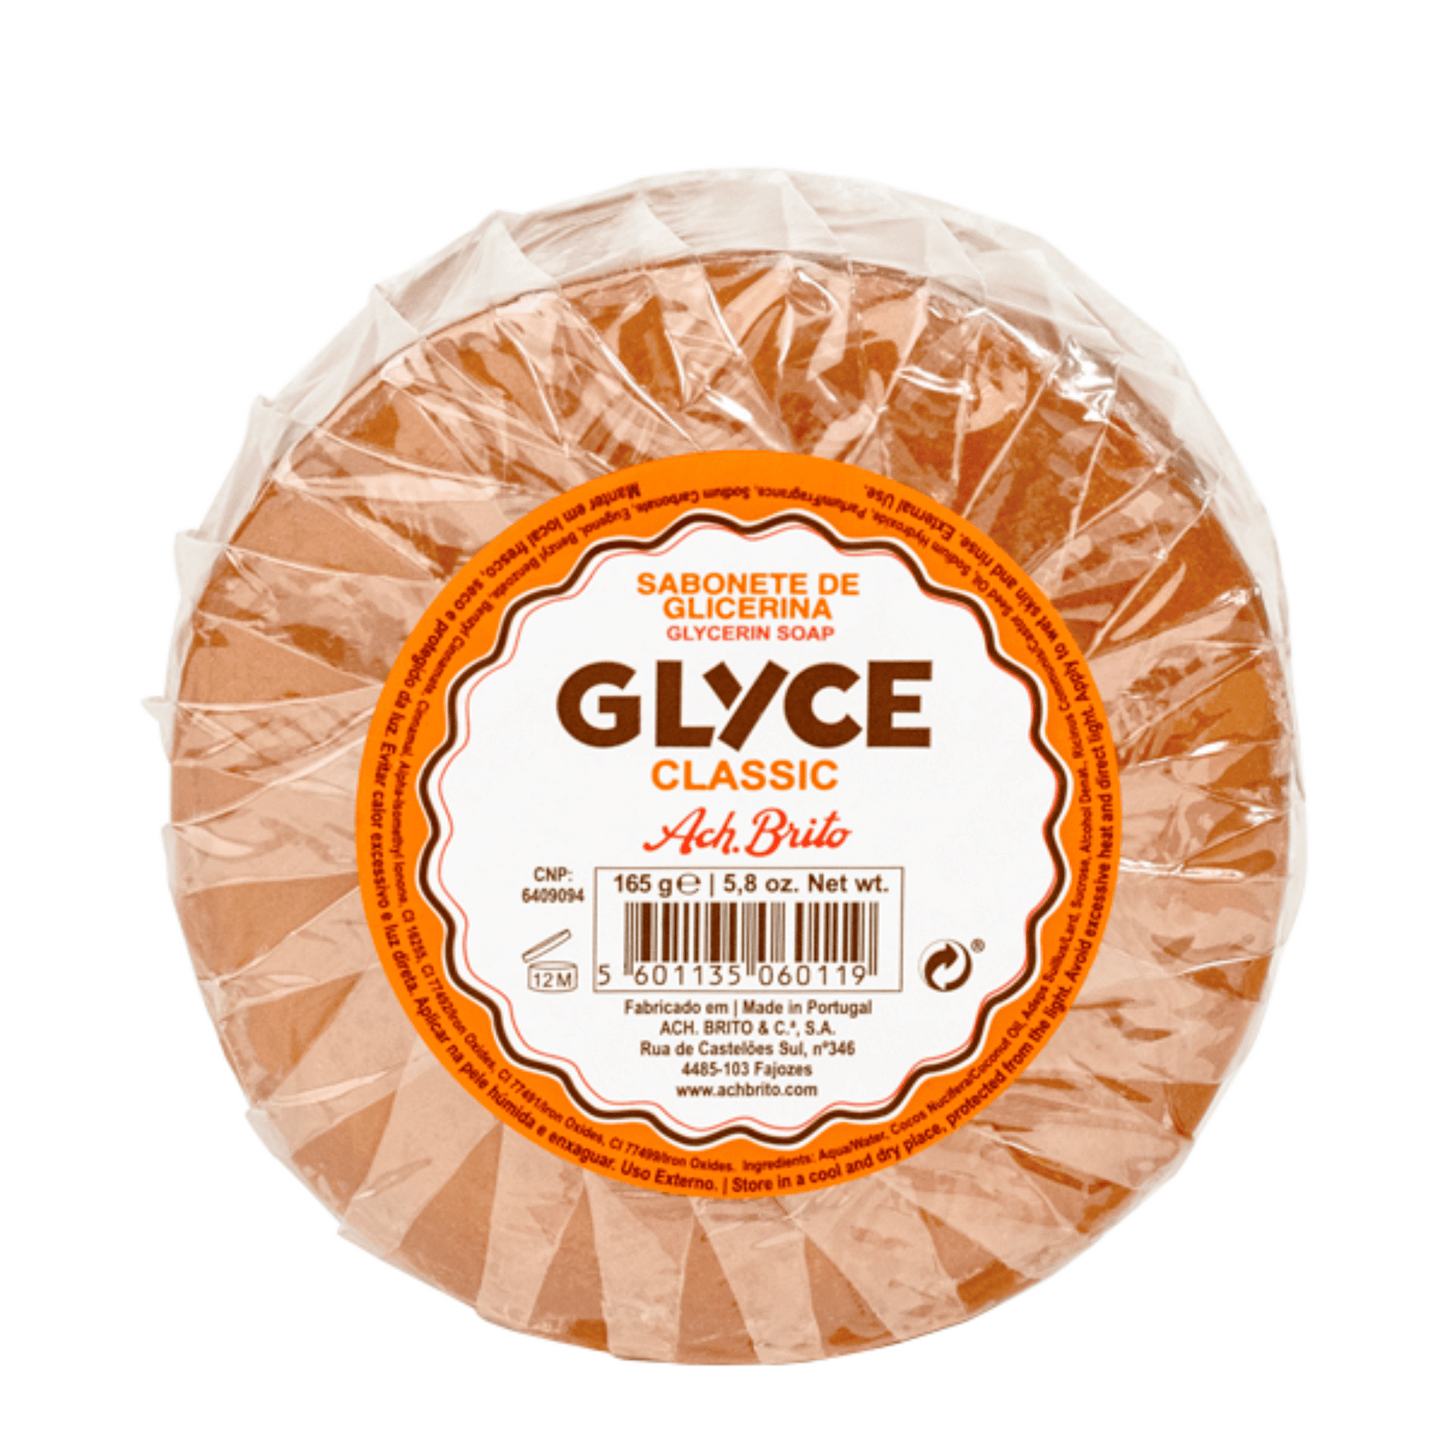 Primary Image of Glyce - Classic Glycerin Soap